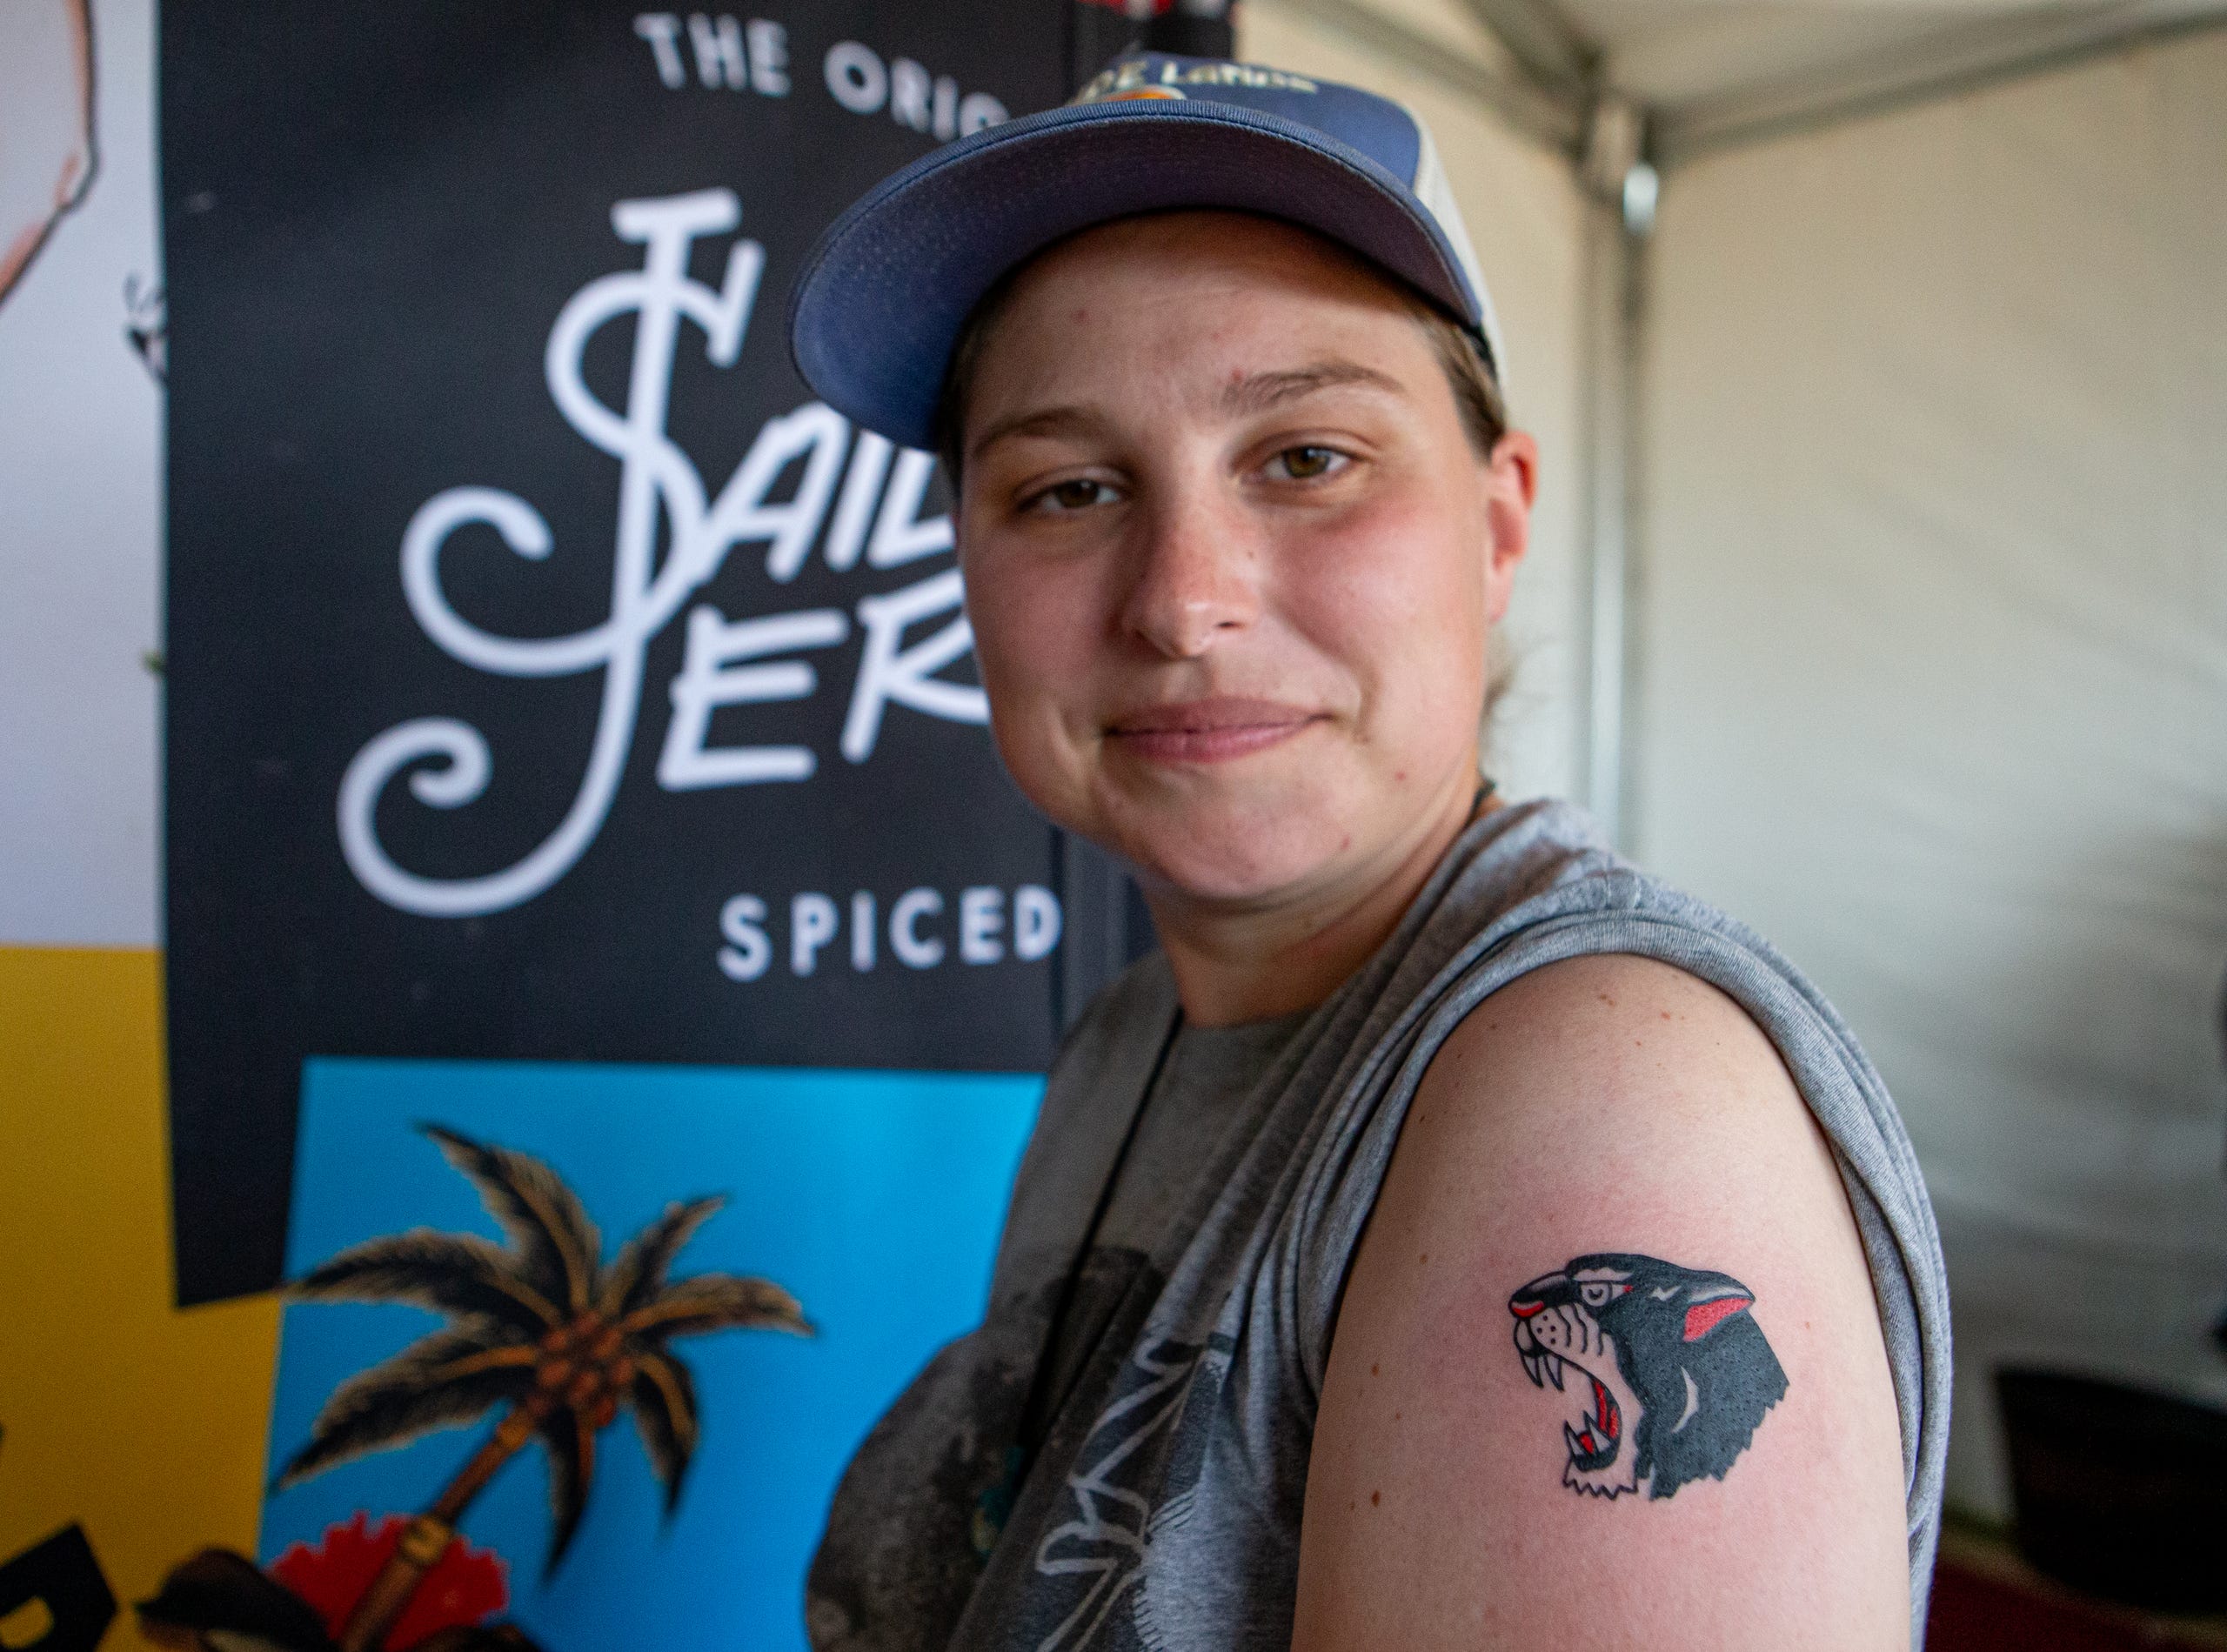 Chef Heske smiles after receiving her first tattoo from artist Christopher Waugh at the Louder Than Life music festival on Friday, Sept. 22, 2023 JEFF FAUGHENDER/COURIER JOURNAL AND USA TODAY NETWORK